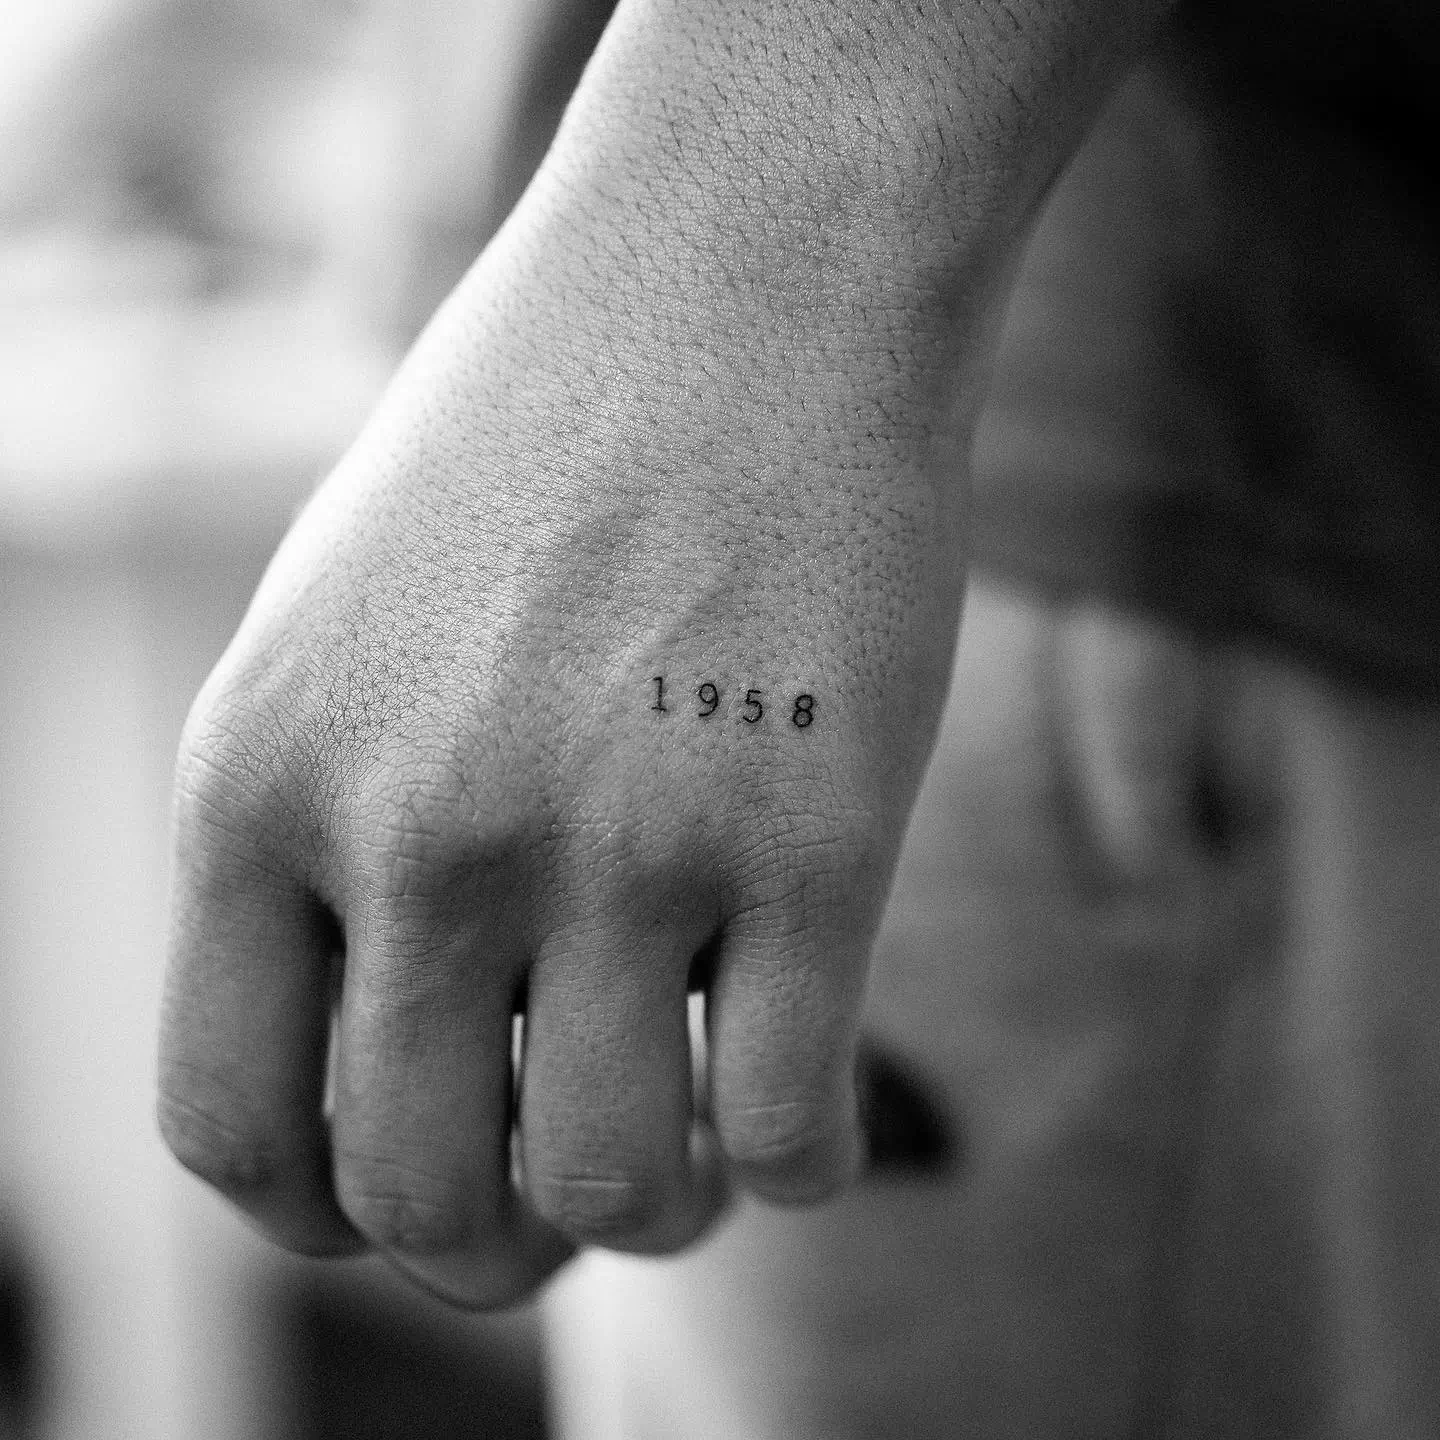 Date Tattoos in Black and White 1